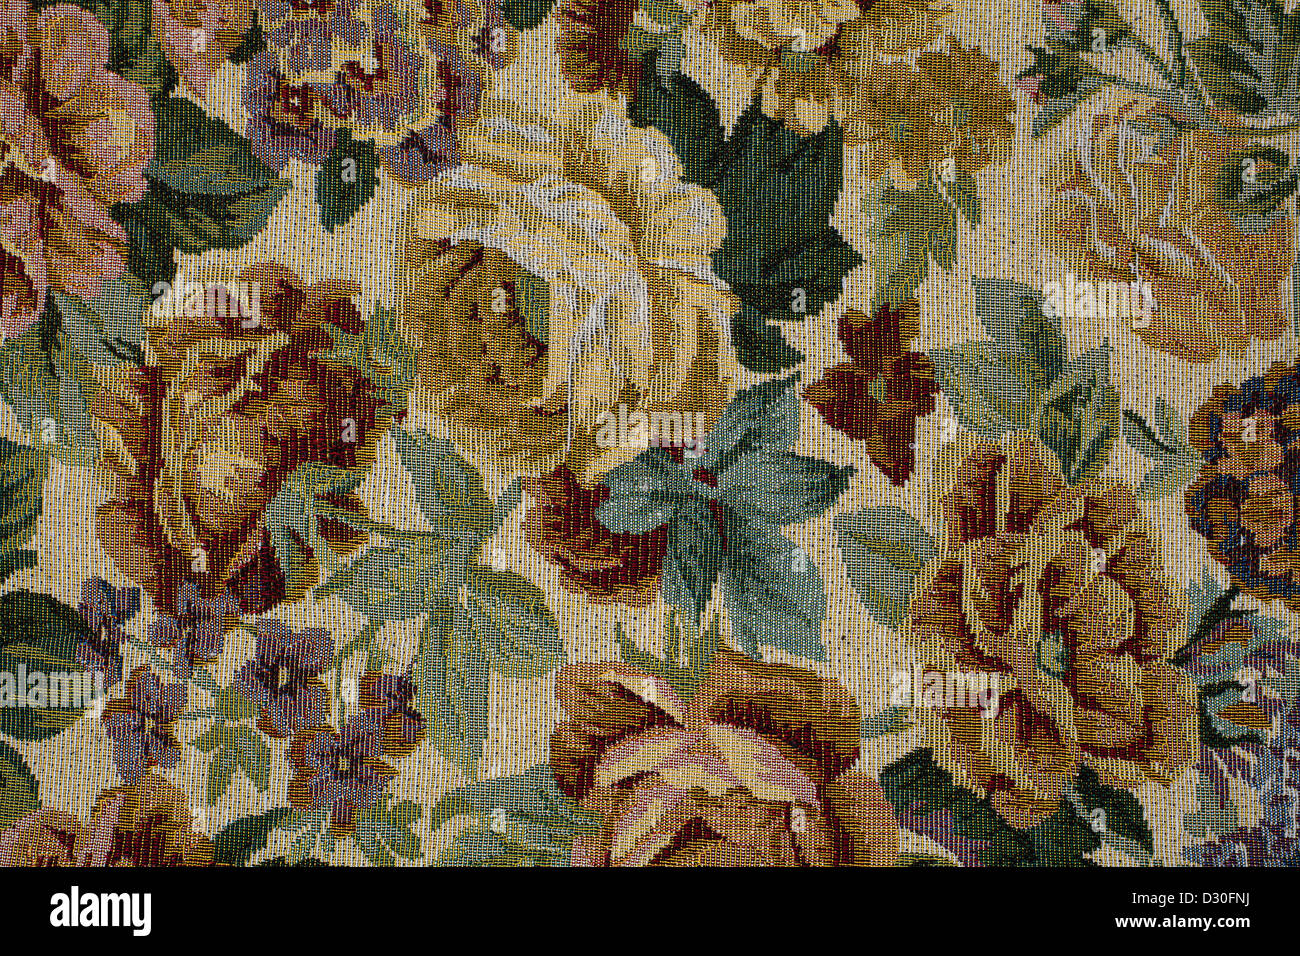 High resolution texture of tapestry with floral design Stock Photo